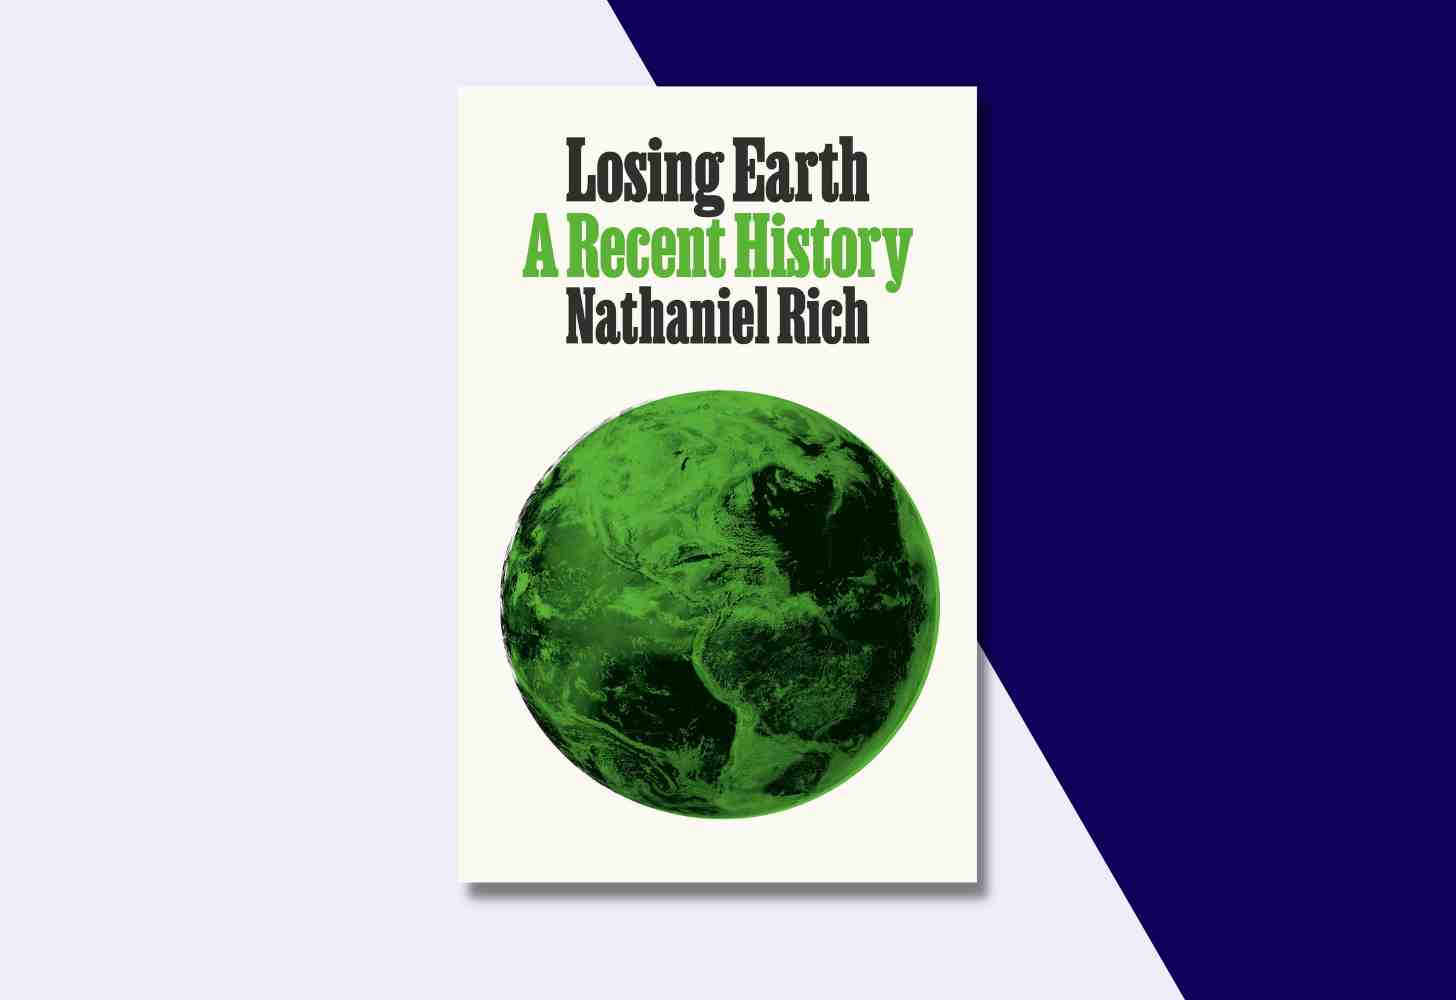 The Cover Of: “Losing Earth: A Recent History” by Nathaniel Rich